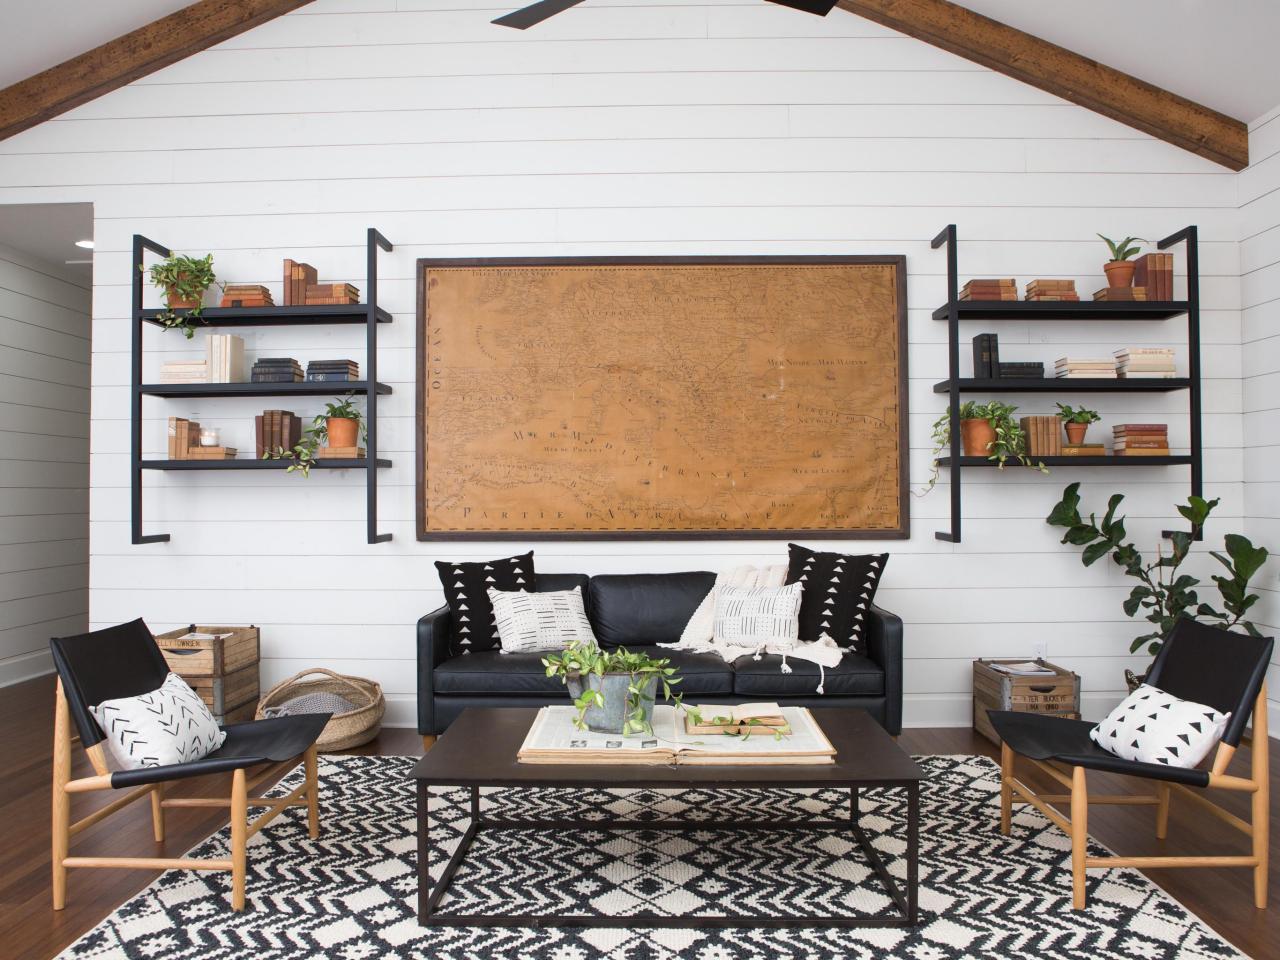 Shiplap-clad living room by Joanna Gaines